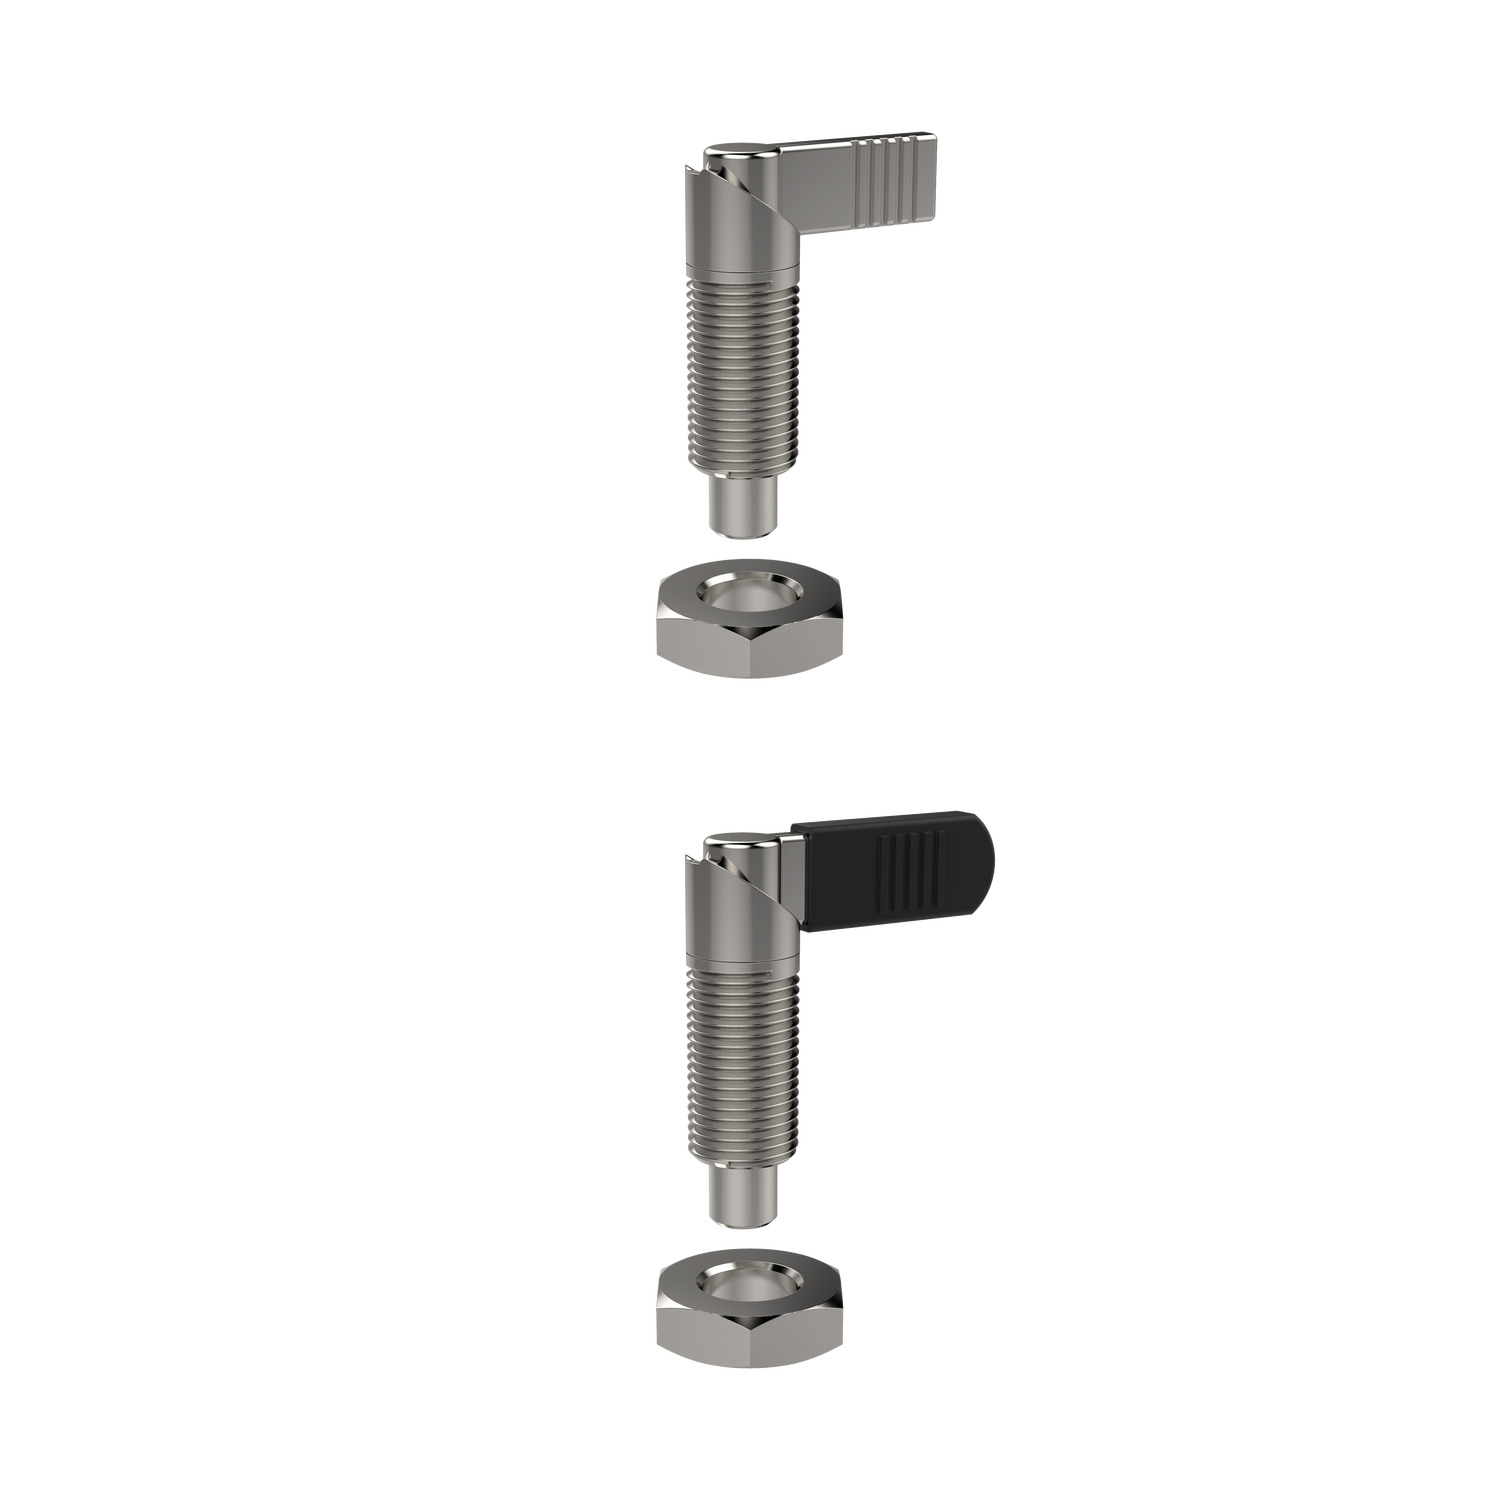 Index Plungers - Lever Grip Lever grip index plungers with locking, stainless steel. Turn lever 180º to retract pin. To enable pin to be held in retracted position, secure lever in notched catch on plunger body.